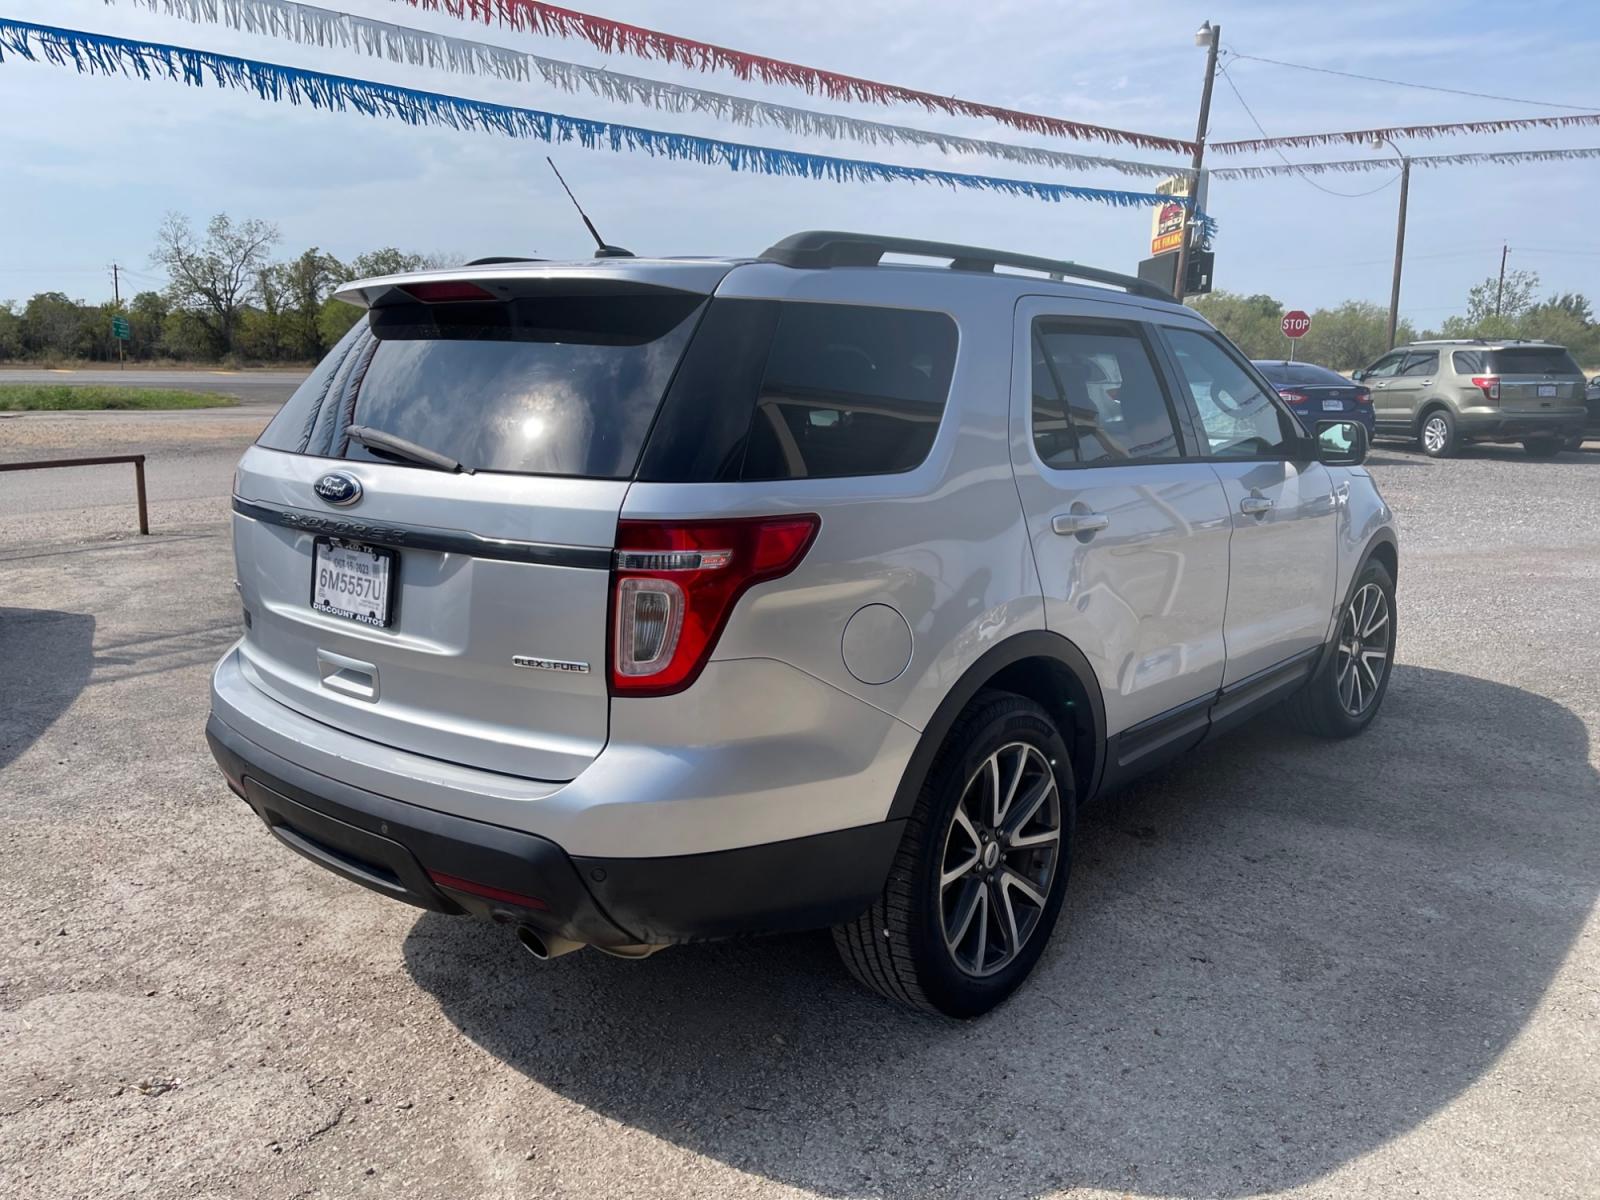 2015 SILVER FORD EXPLORER XLT (1FM5K7D80FG) with an 3.5L engine, Automatic transmission - www.discountautosinc.com TEXT QUESTIONS TO 210-900-3118 41 MONTHLY PAYMENTS OF $365 WITH $2695 DOWN AND FINAL ODD PAYMENT OF $337.06 W/FIRST PAYMENT DUE 30 DAYS FROM DATE OF SALE. FEATURES: BACK UP CAMERA, QUAD SEATING, 3RD ROW, HEATED LEATHER SEATING, ELECTRIC REAR HATCH WARRANTY - Photo #3